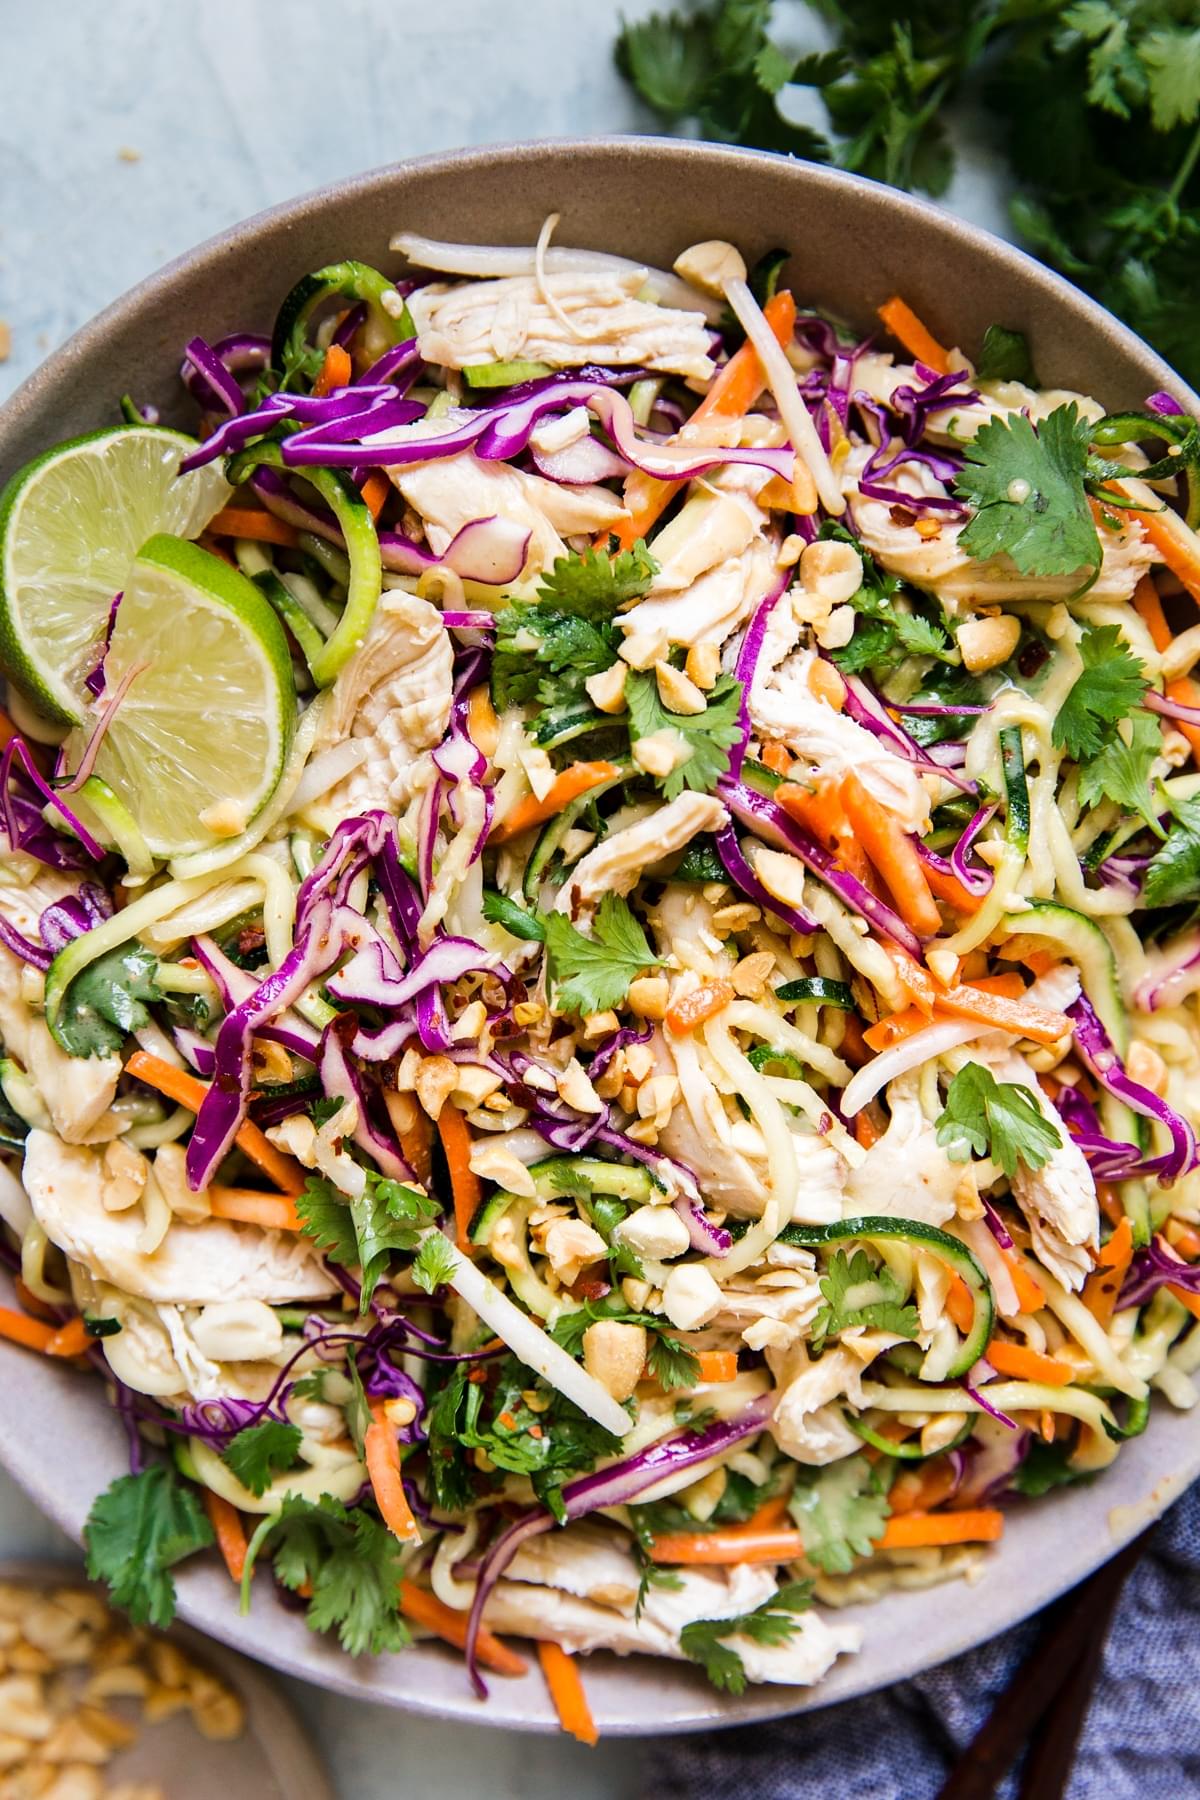 Thai Zucchini noodle salad with chicken, peanuts, and fresh limes in a bowl